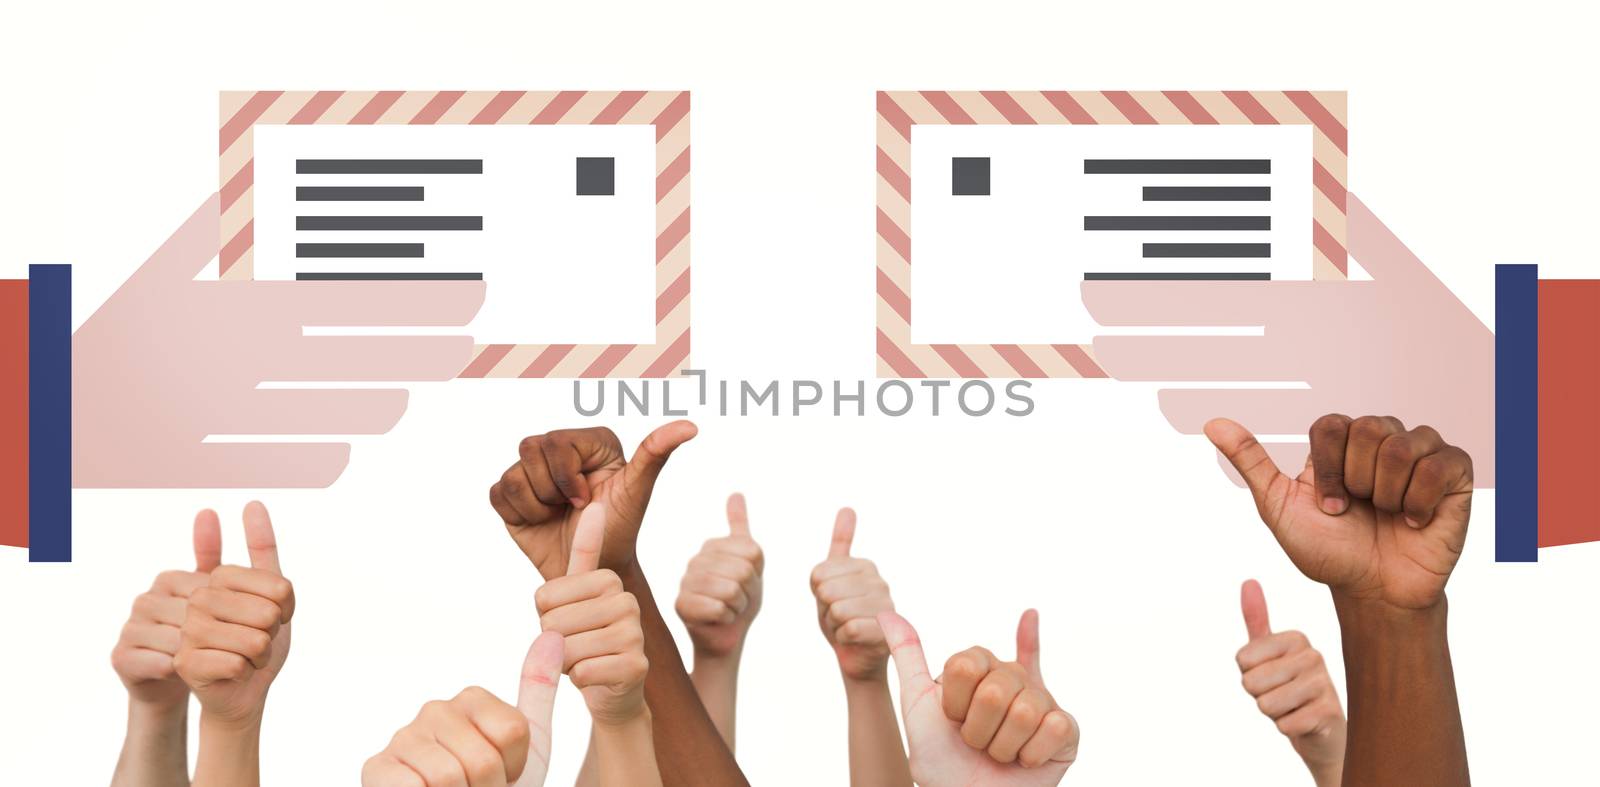 Hands giving thumbs up  against hand posting letter